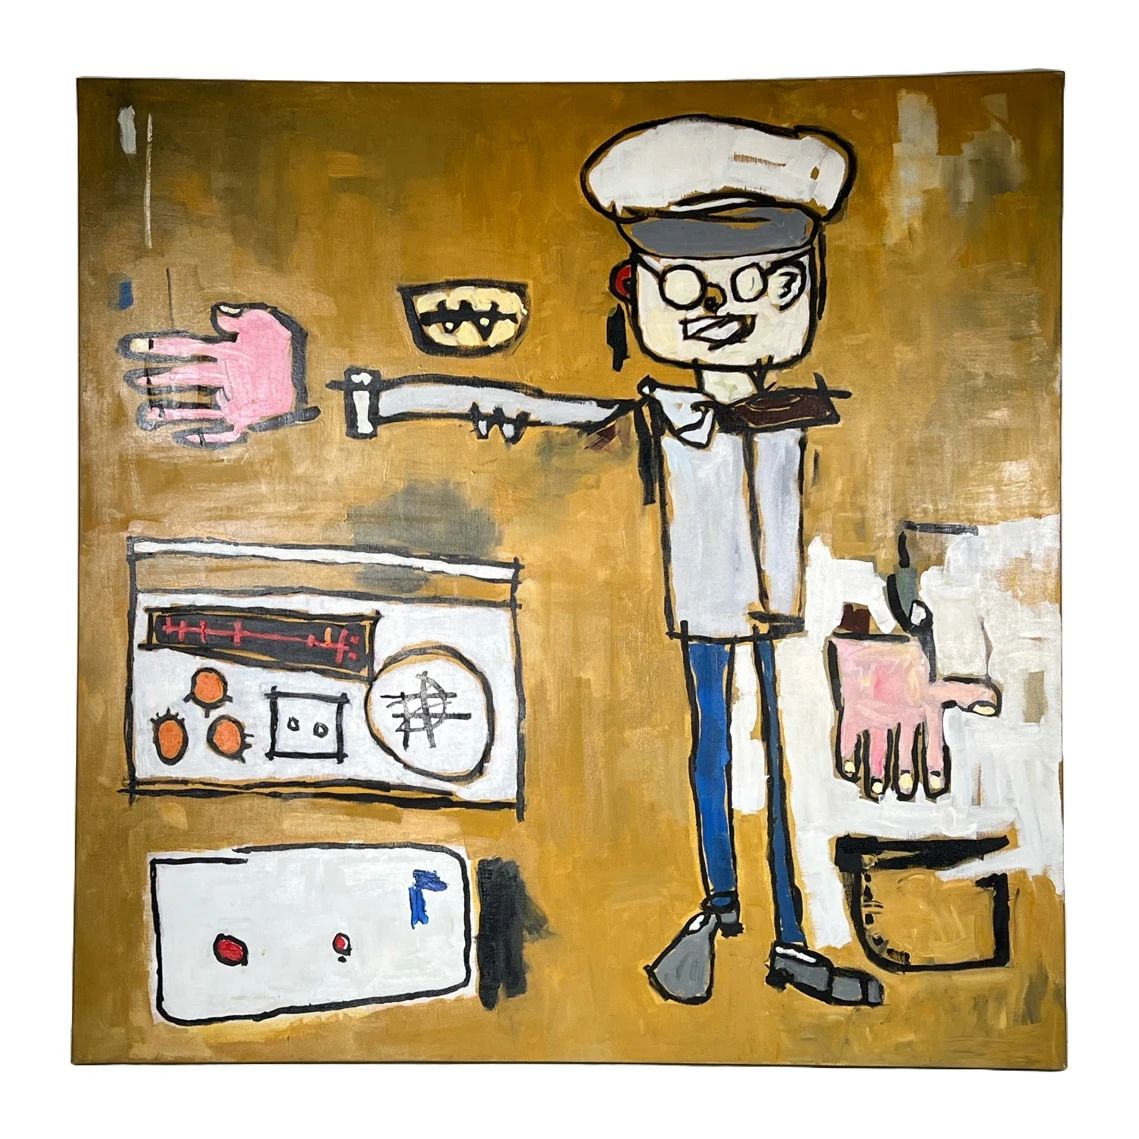 MODERN OIL PAINTING | "Street DJ". Oil on canvas. Loose, cartoonish style, depicting a figure and a boombox on a simple, modern background. - l. 43.25 x h. 43.25 in